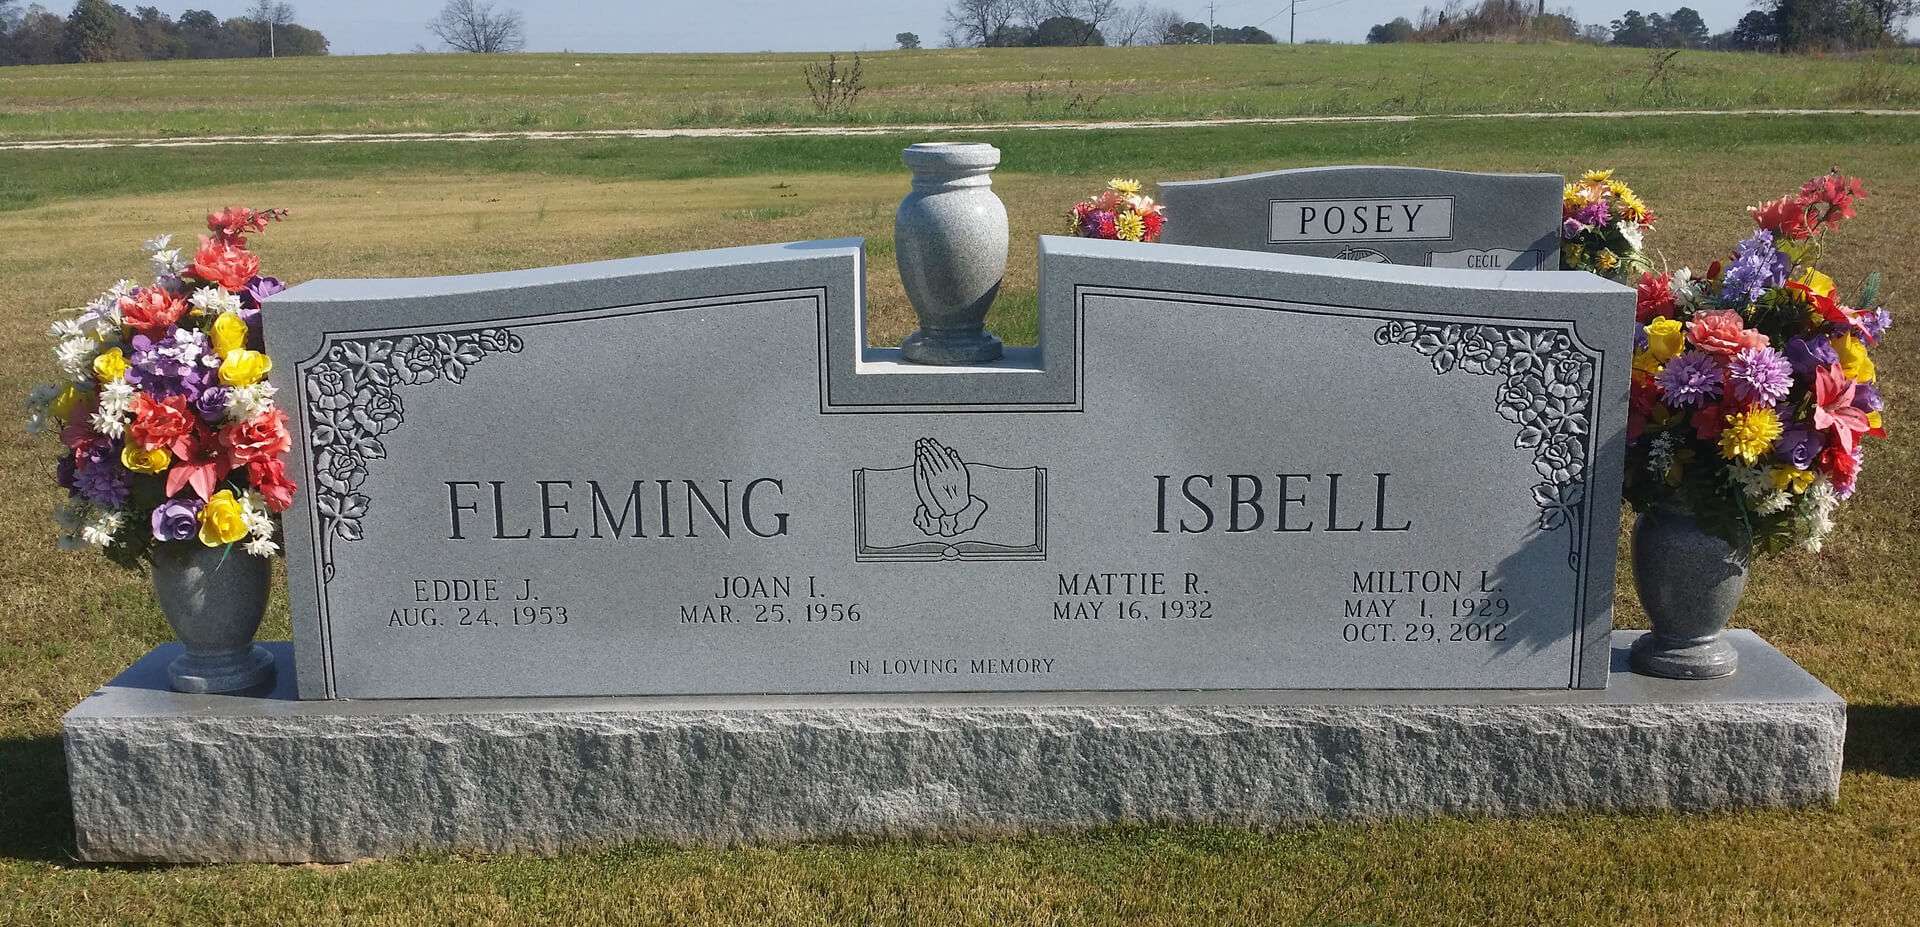 A memorial slab with the name Fleming and Isbell